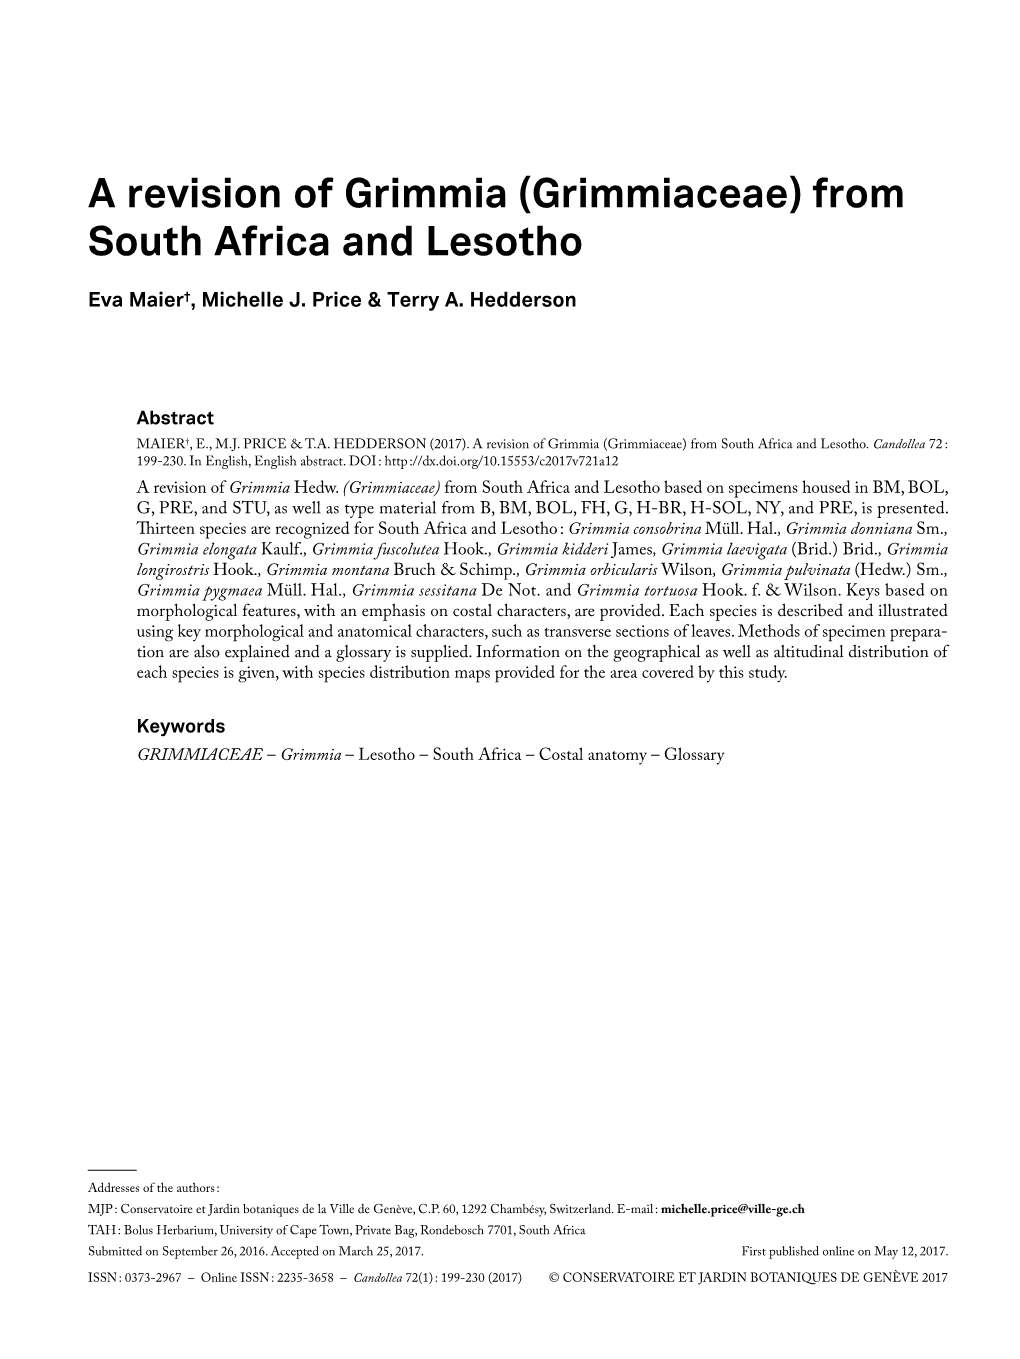 A Revision of Grimmia (Grimmiaceae) from South Africa and Lesotho